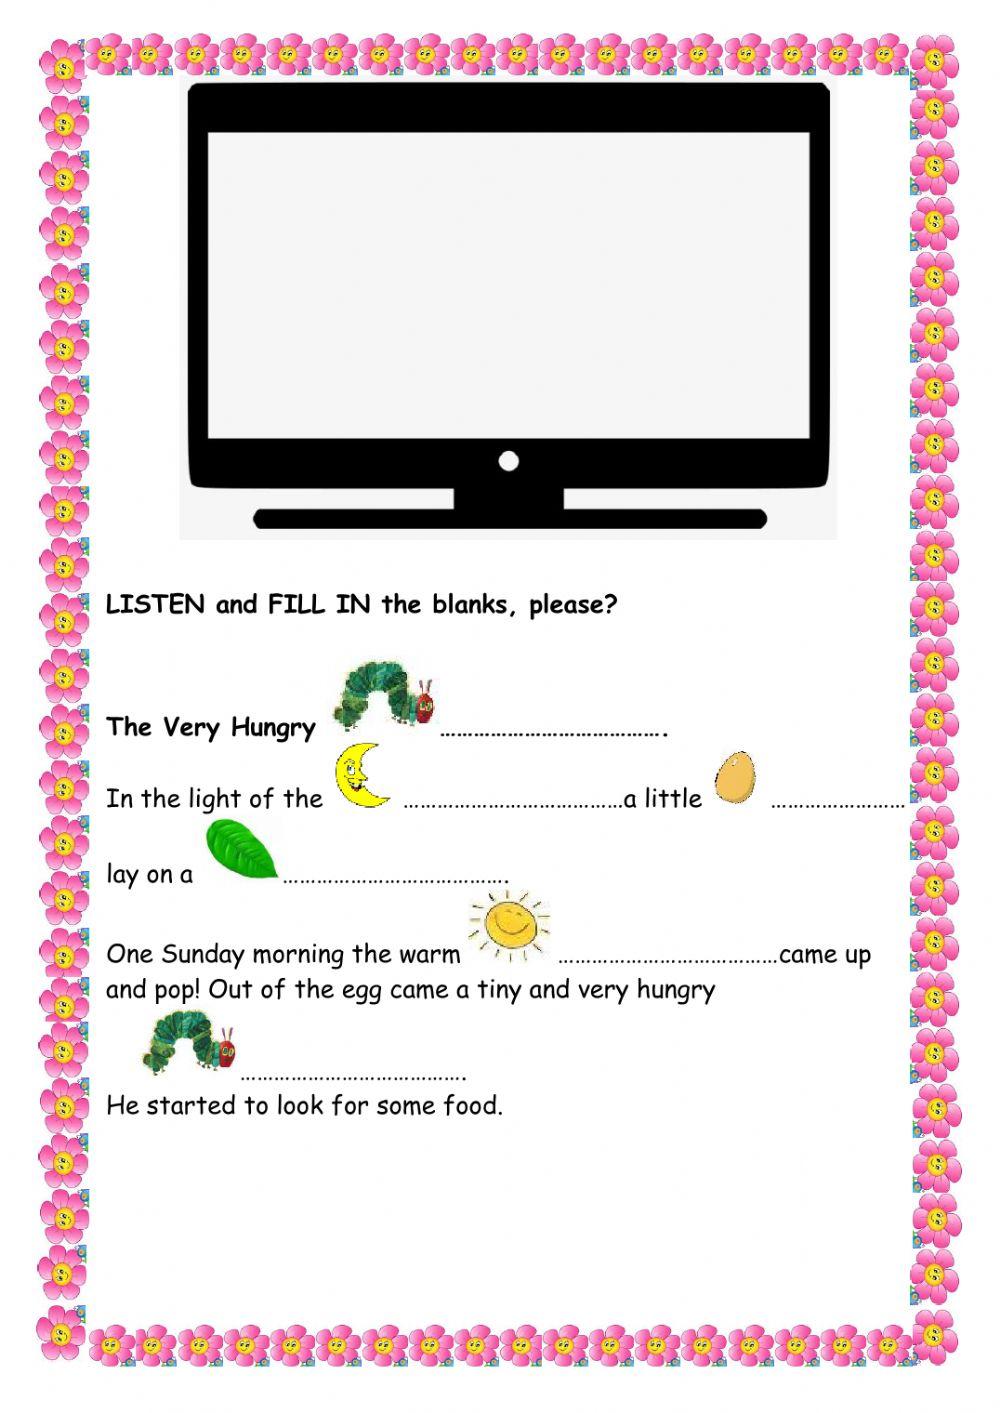 The Very Hungry Caterpillar Story (Listening )